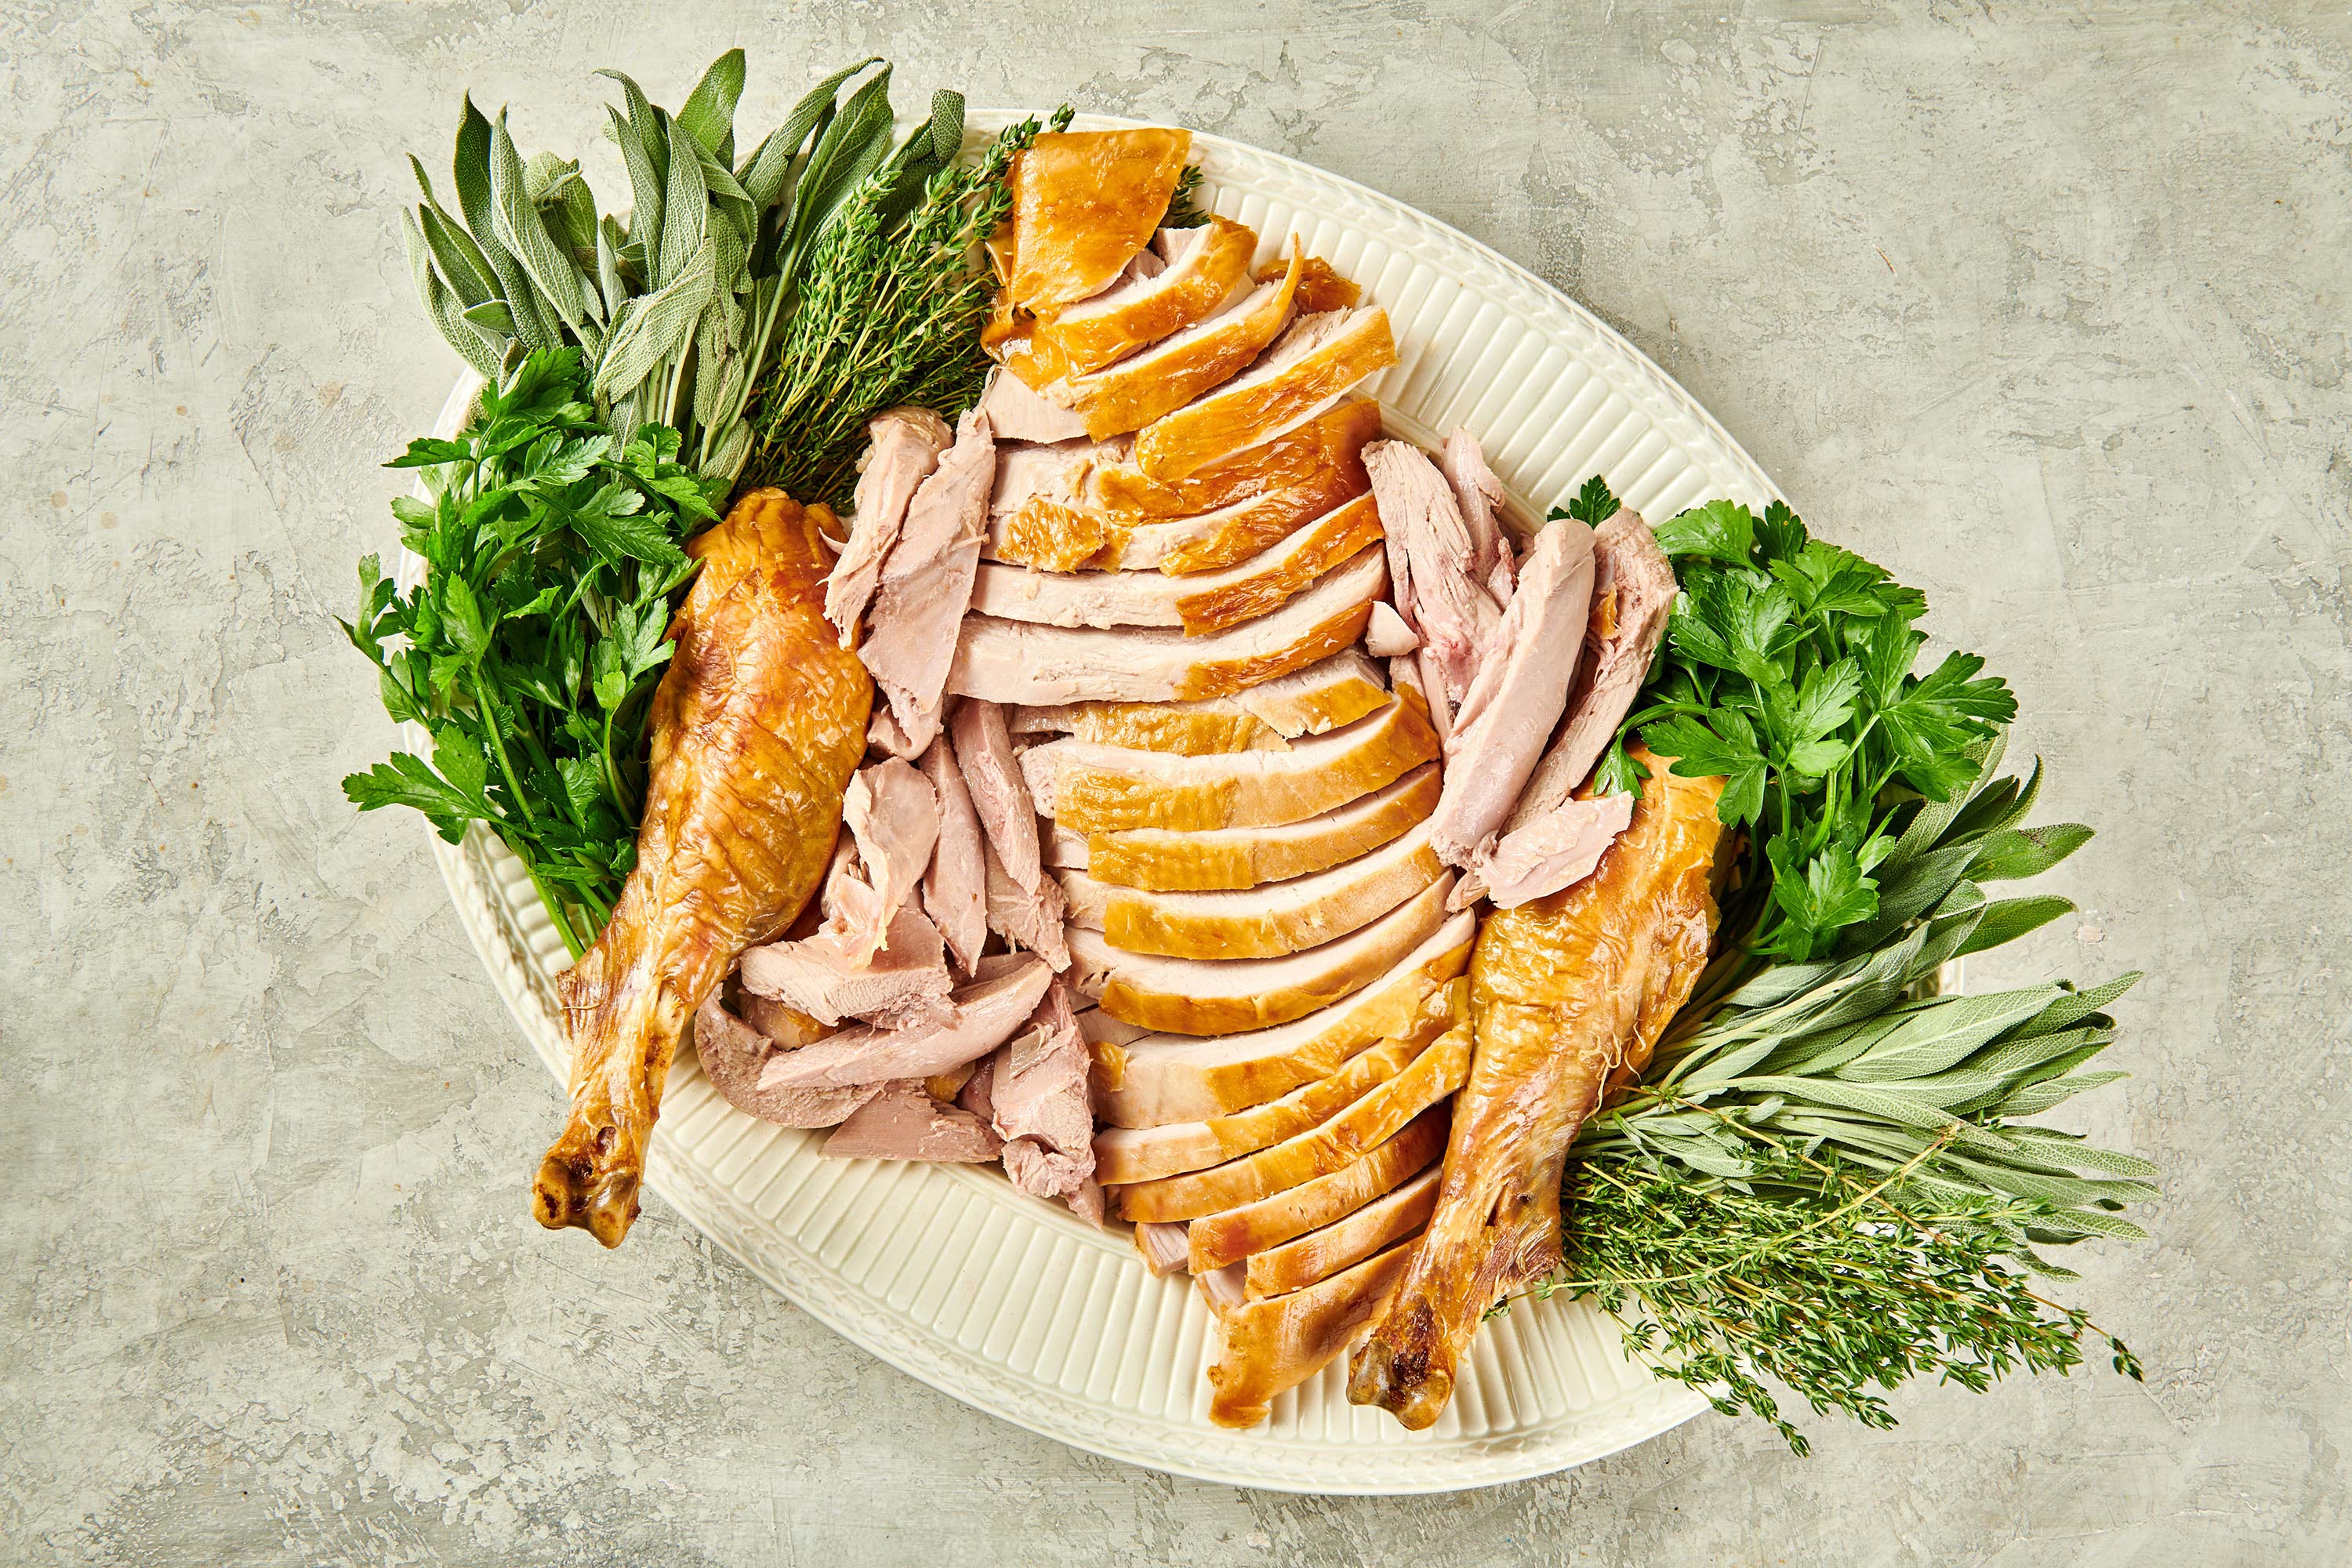 Platter of herbs and carved turkey.